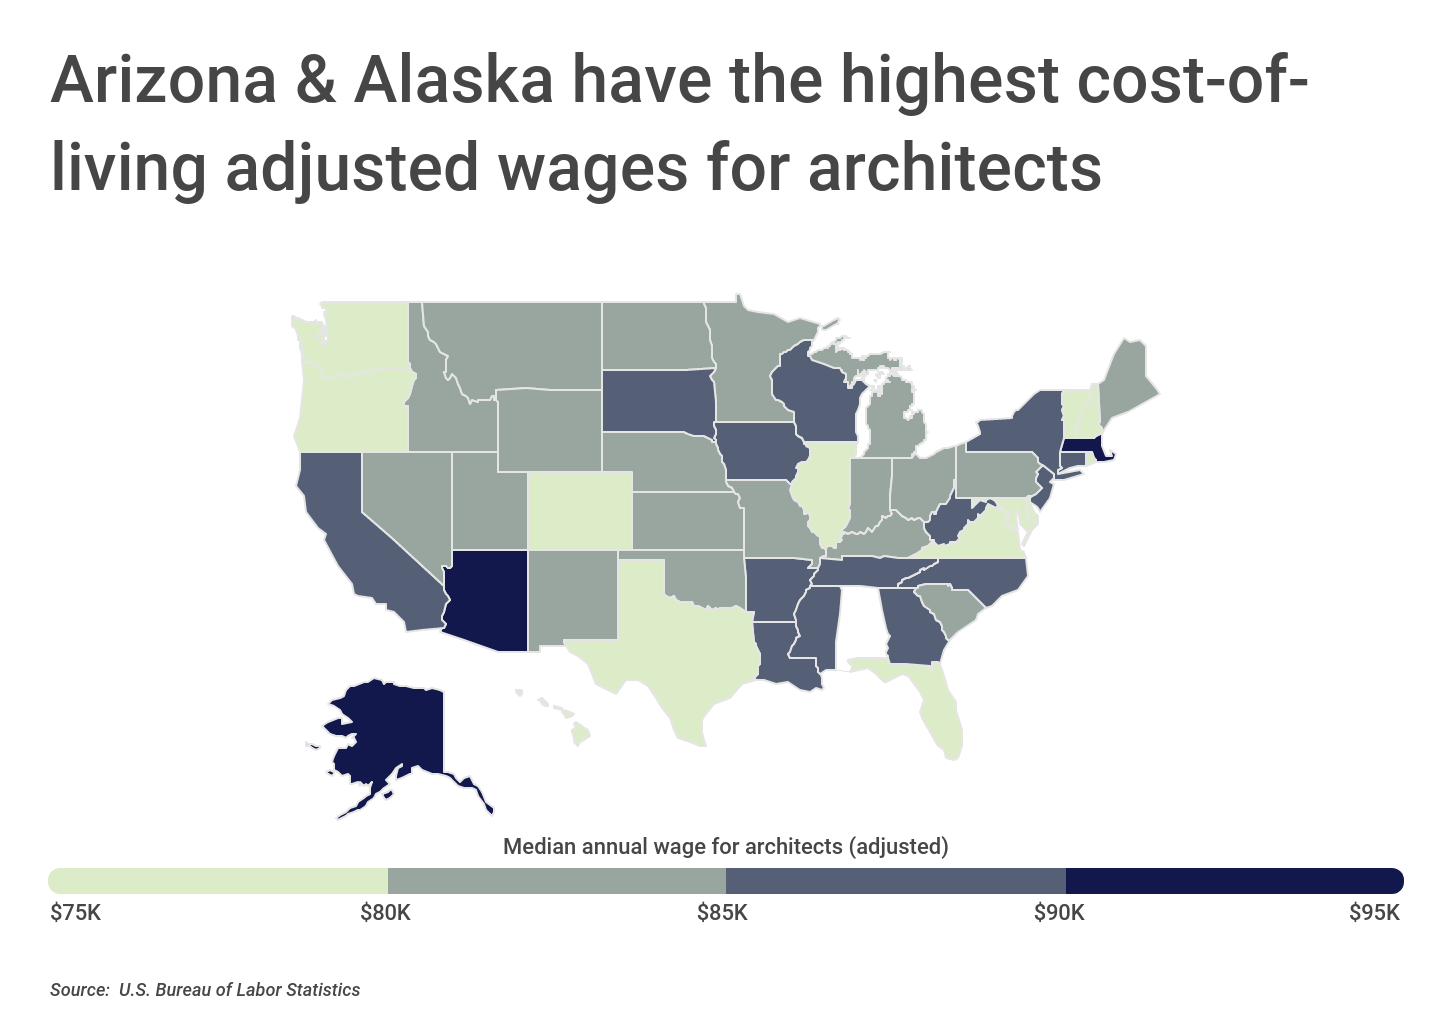 Chart3_AZ & AK have the highest cost of living adjusted wages for architects